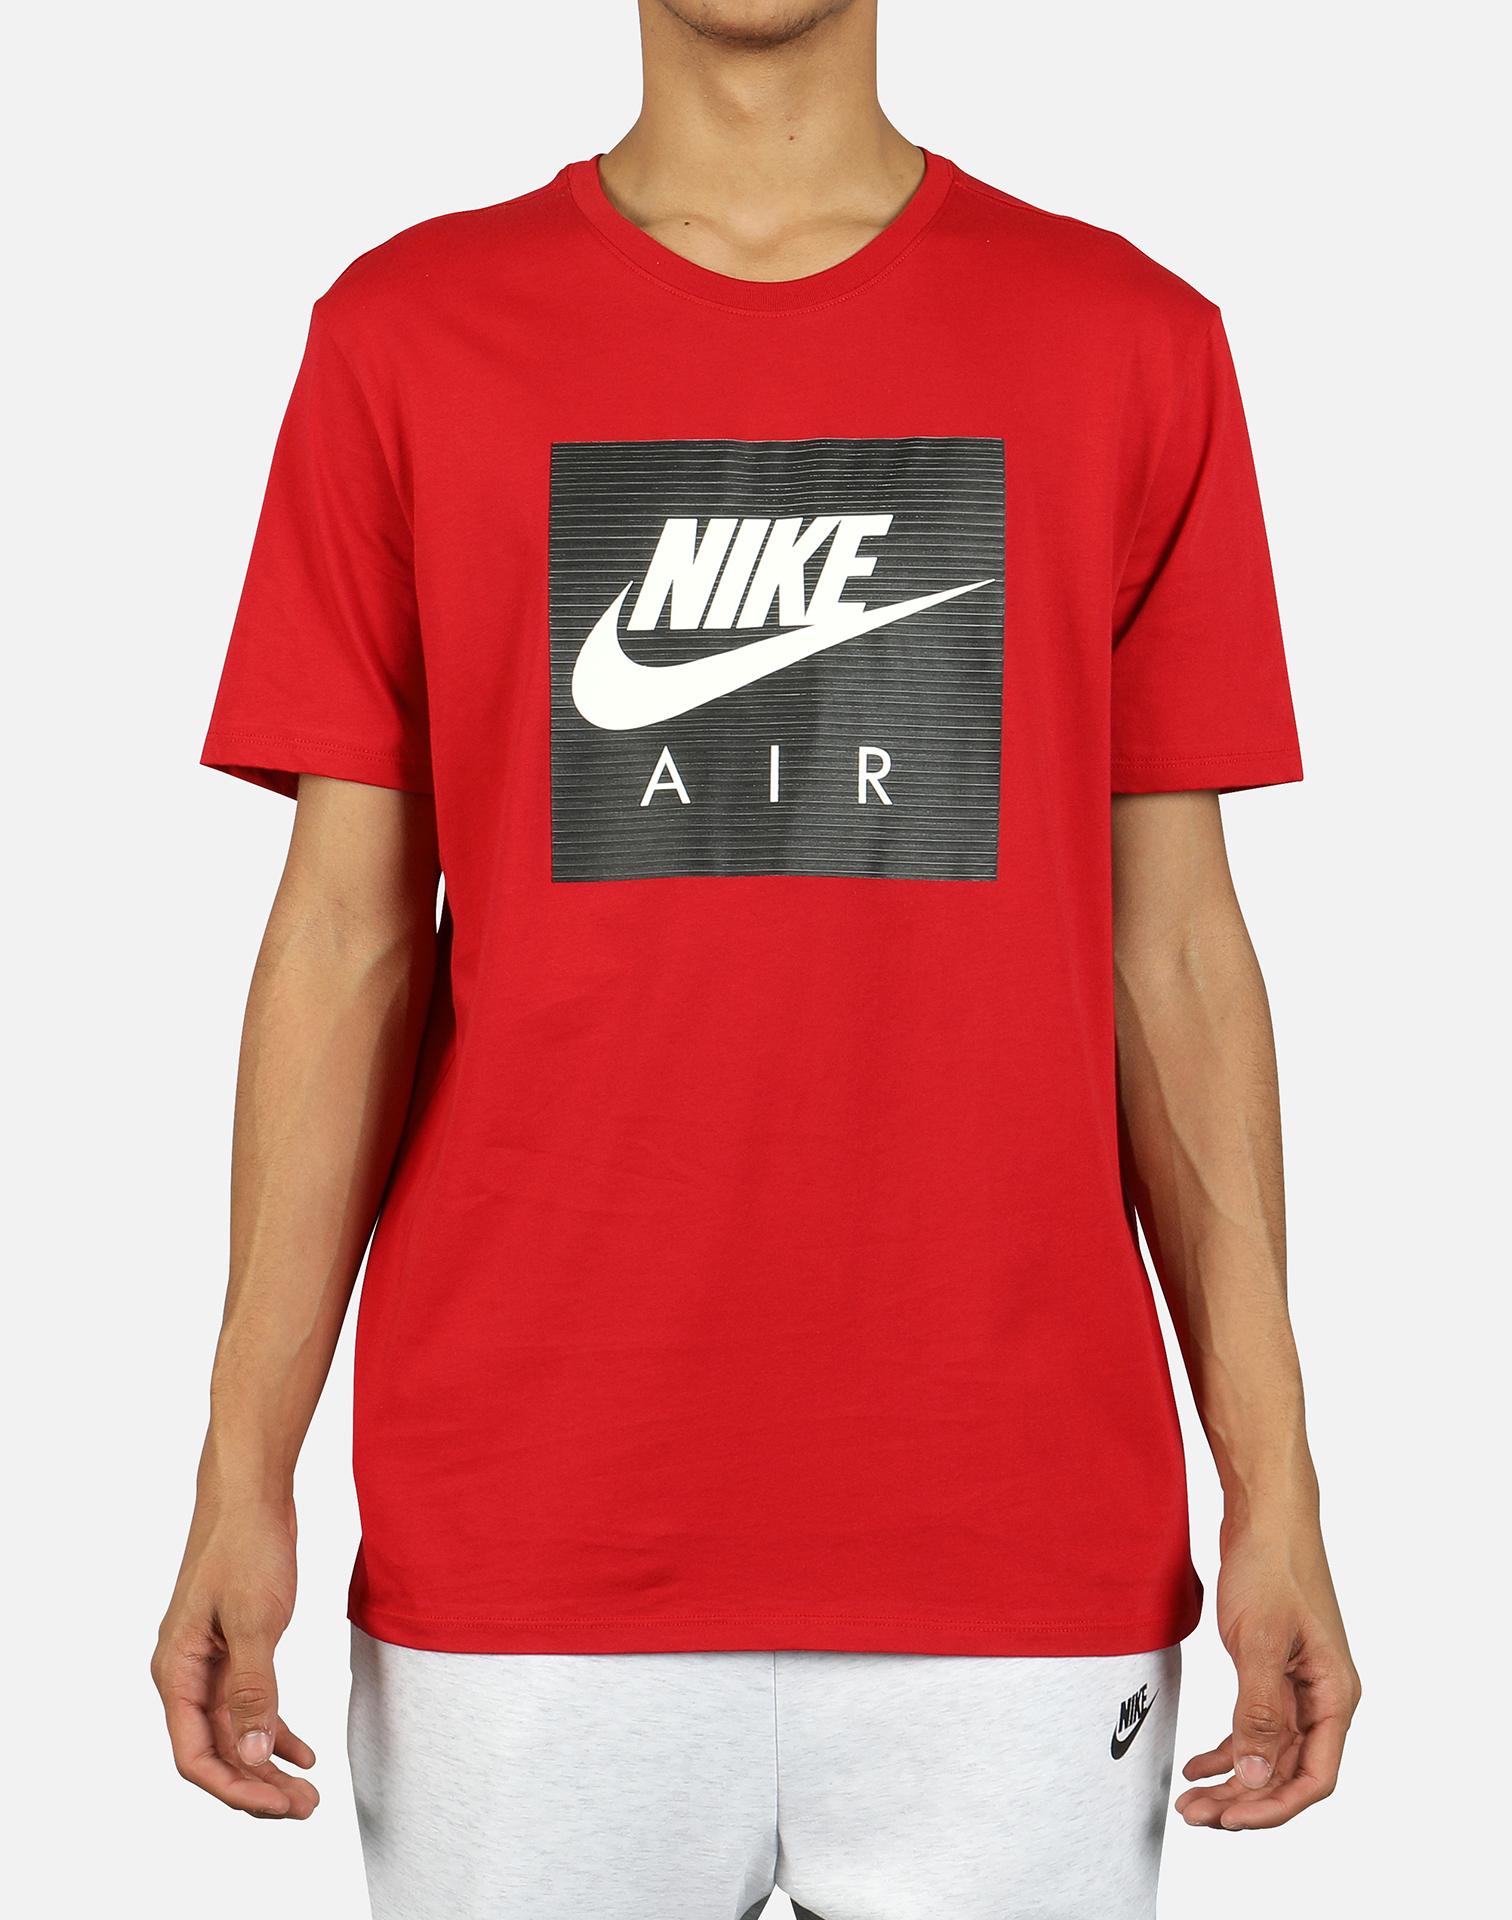 Nike Cotton Nsw Air Logo Tee in Red - Lyst